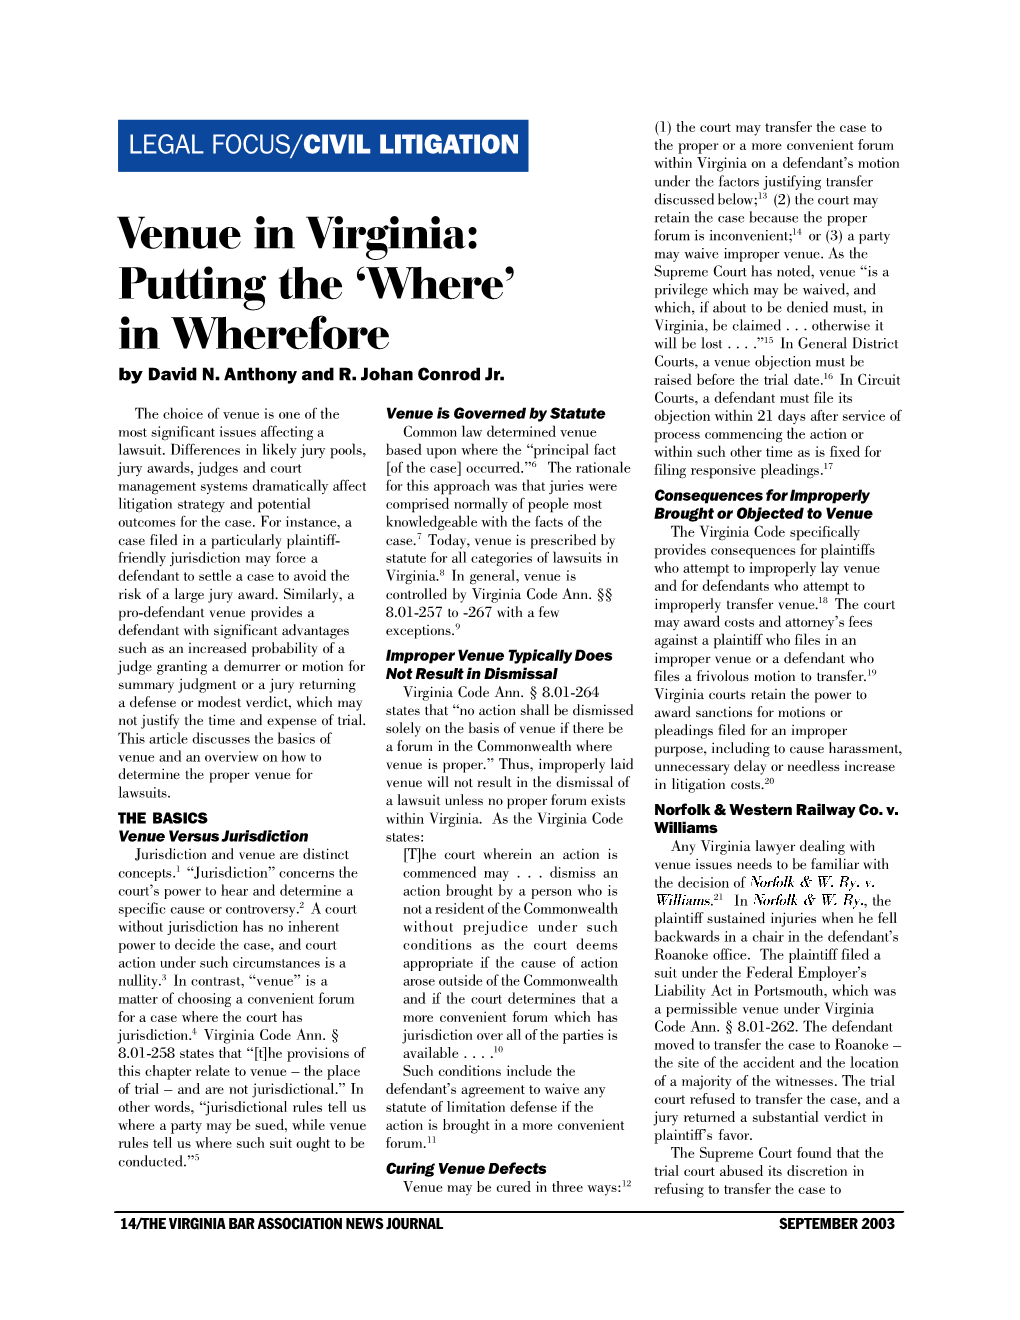 Venue in Virginia: Putting the 'Where' in Wherefore